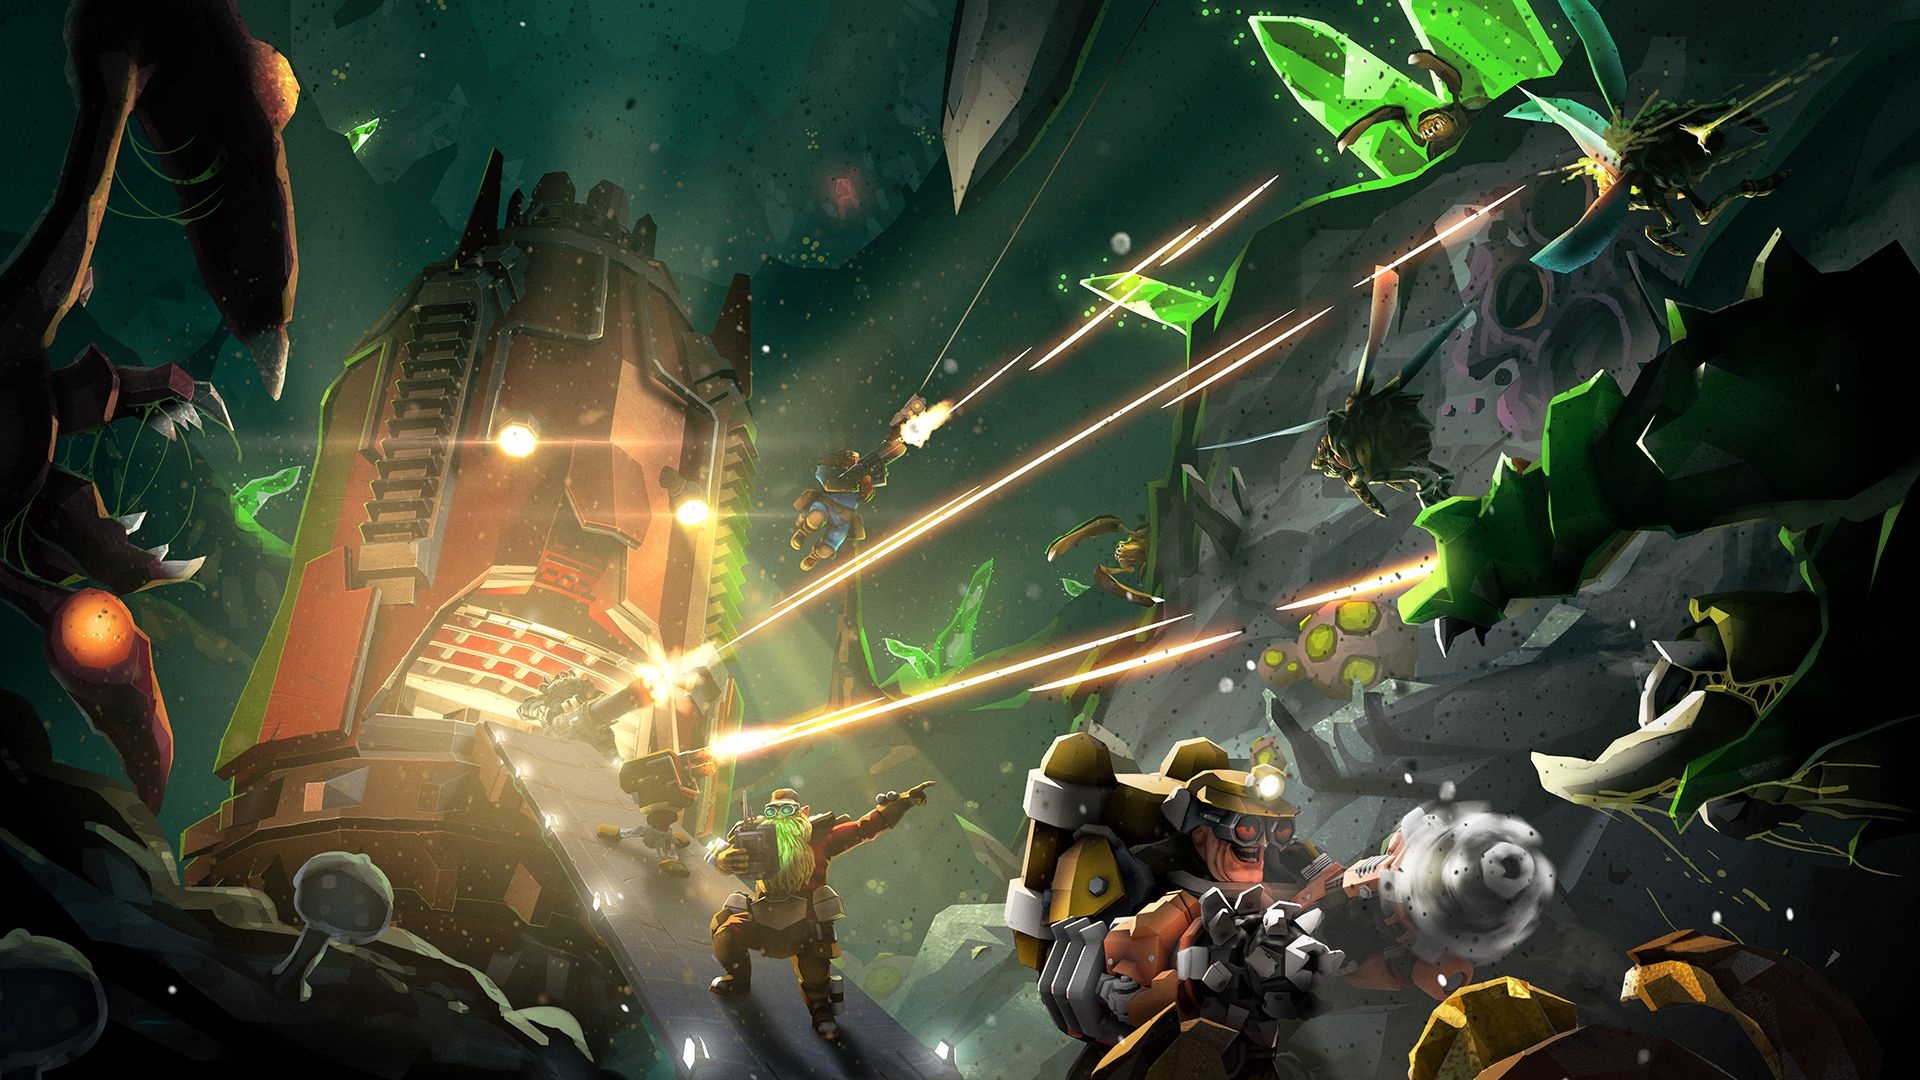 Deep Rock Galactic: Players fight insect-like aliens to collect materials for crafting. 1920x1080 Full HD Wallpaper.